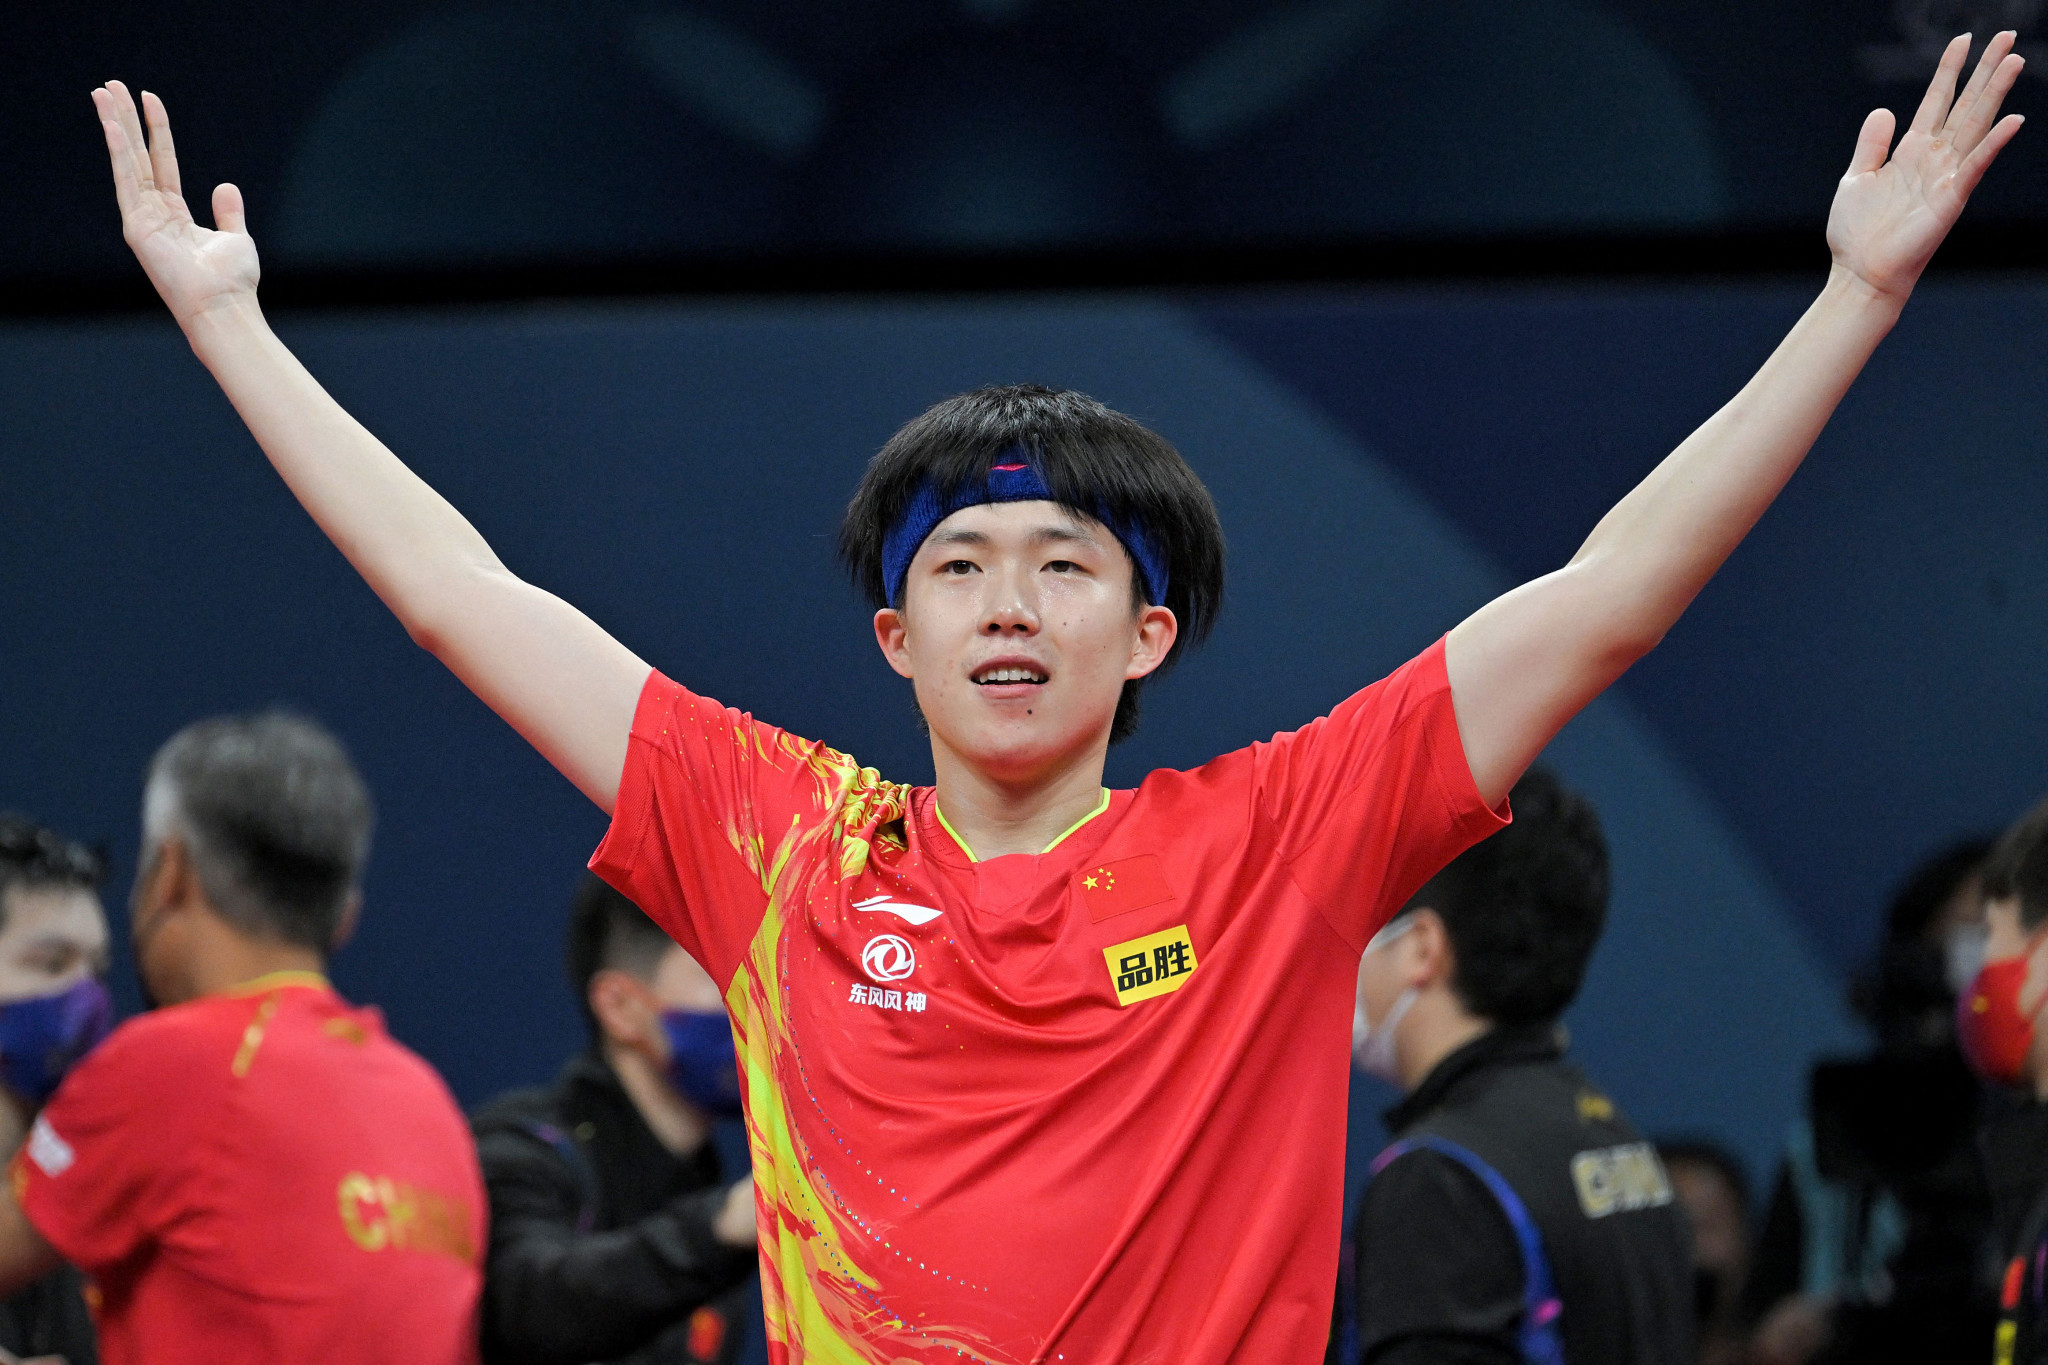 Wang Chuqin provided a crucial fifth game victory for China in the men's semi-final against Japan's Shunsuke Togami ©Getty Images